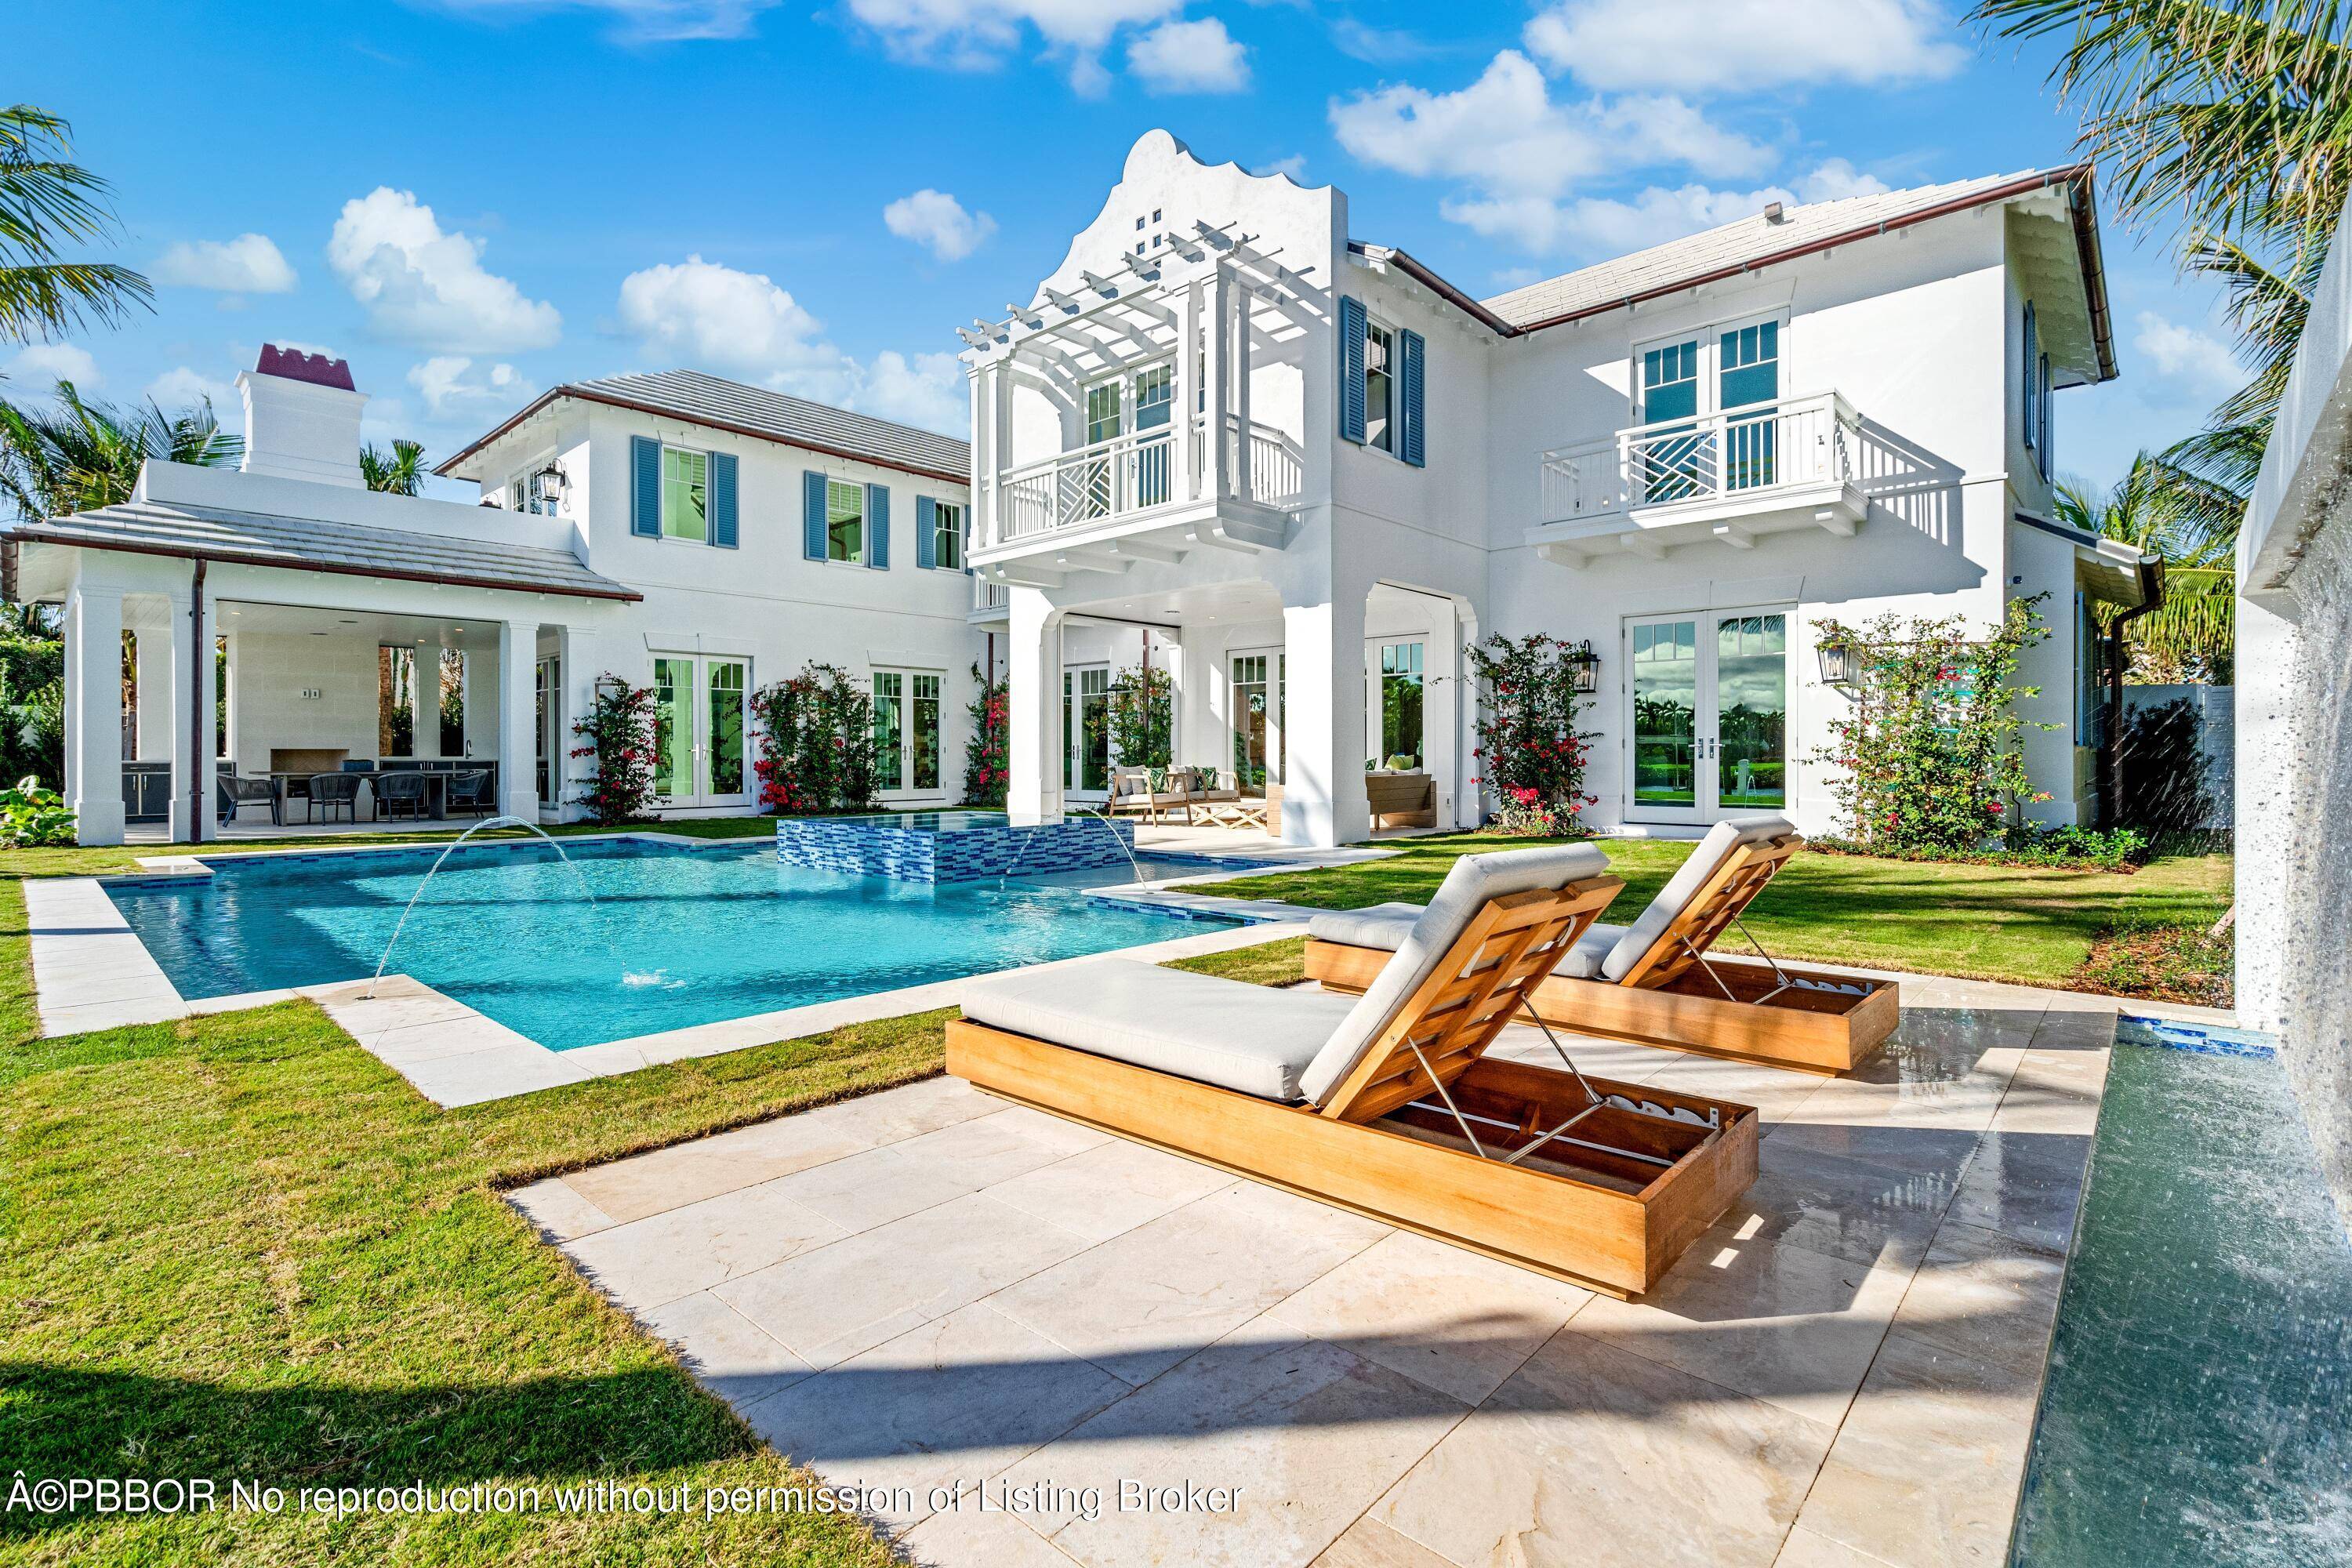 Welcome to 584 Island Drive, the premier newly built home available on Everglades Island in Palm Beach.